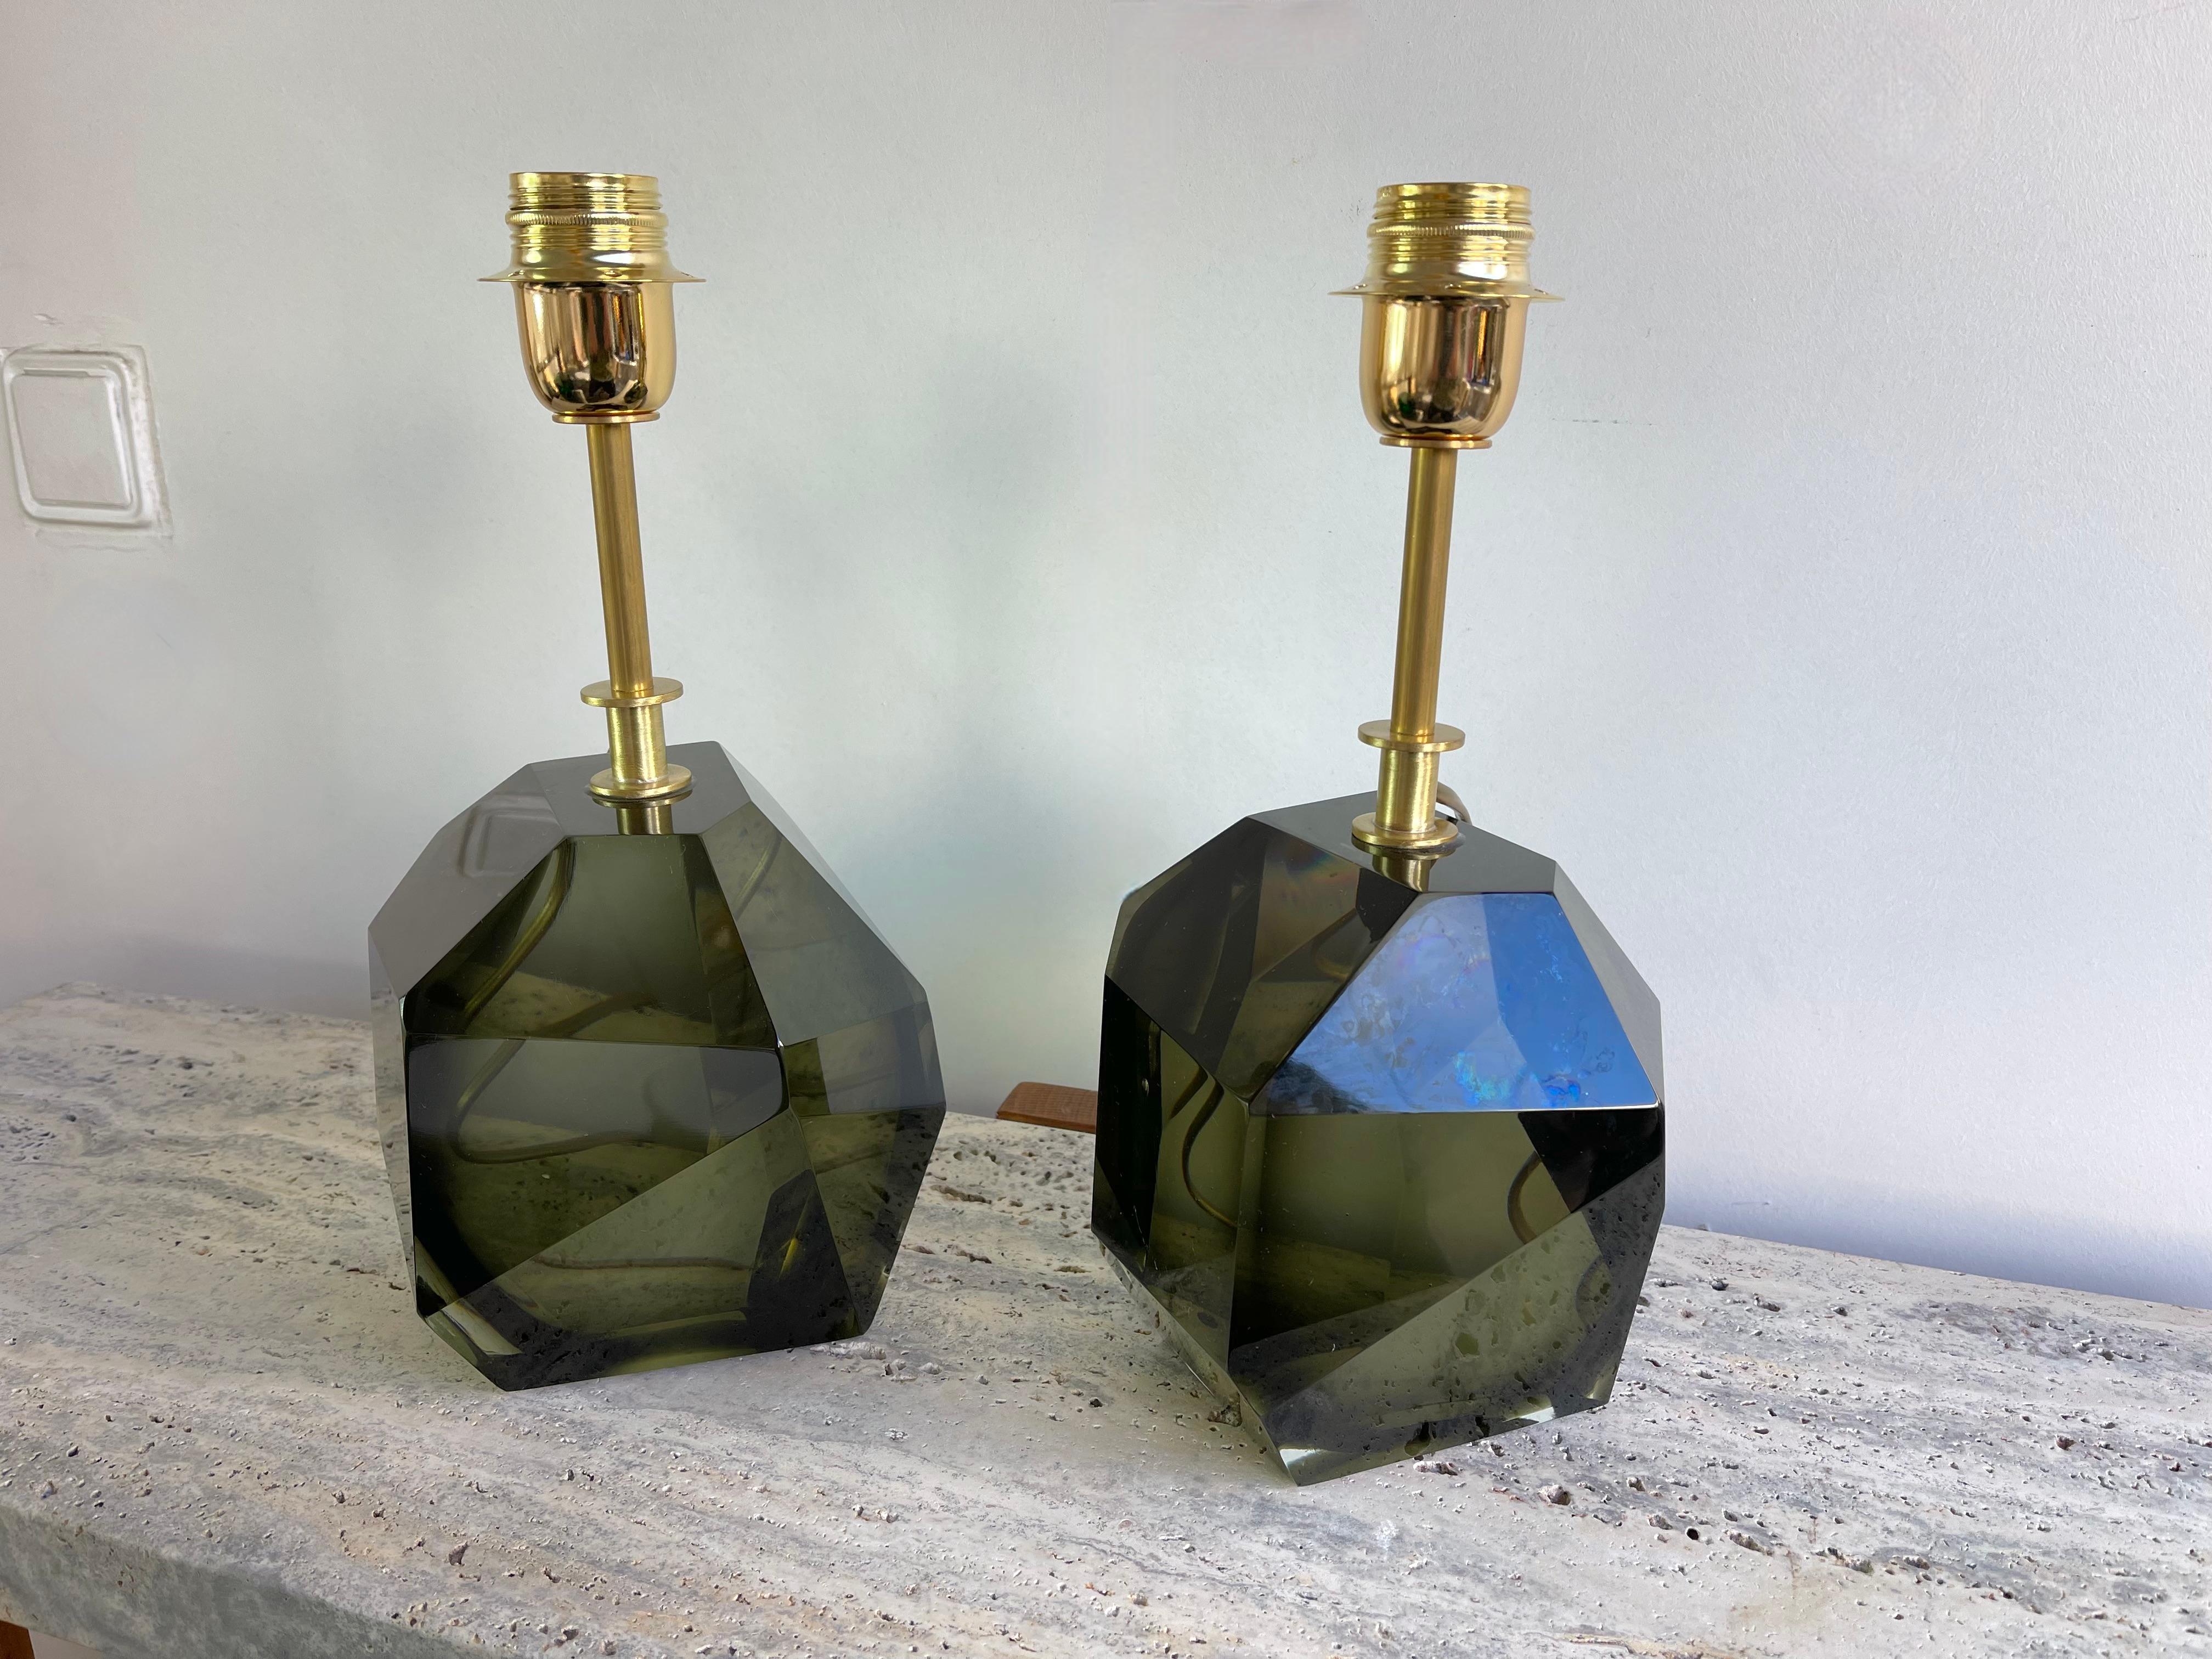 Pair of massive block stone diamond smoke gray faceted Murano glass and brass table or bedside lamps. Contemporary work from a small artisanal italian design workshop. In the mood of Mid-Century Modern, Hollywood Regency, Venini, Mazzega, La